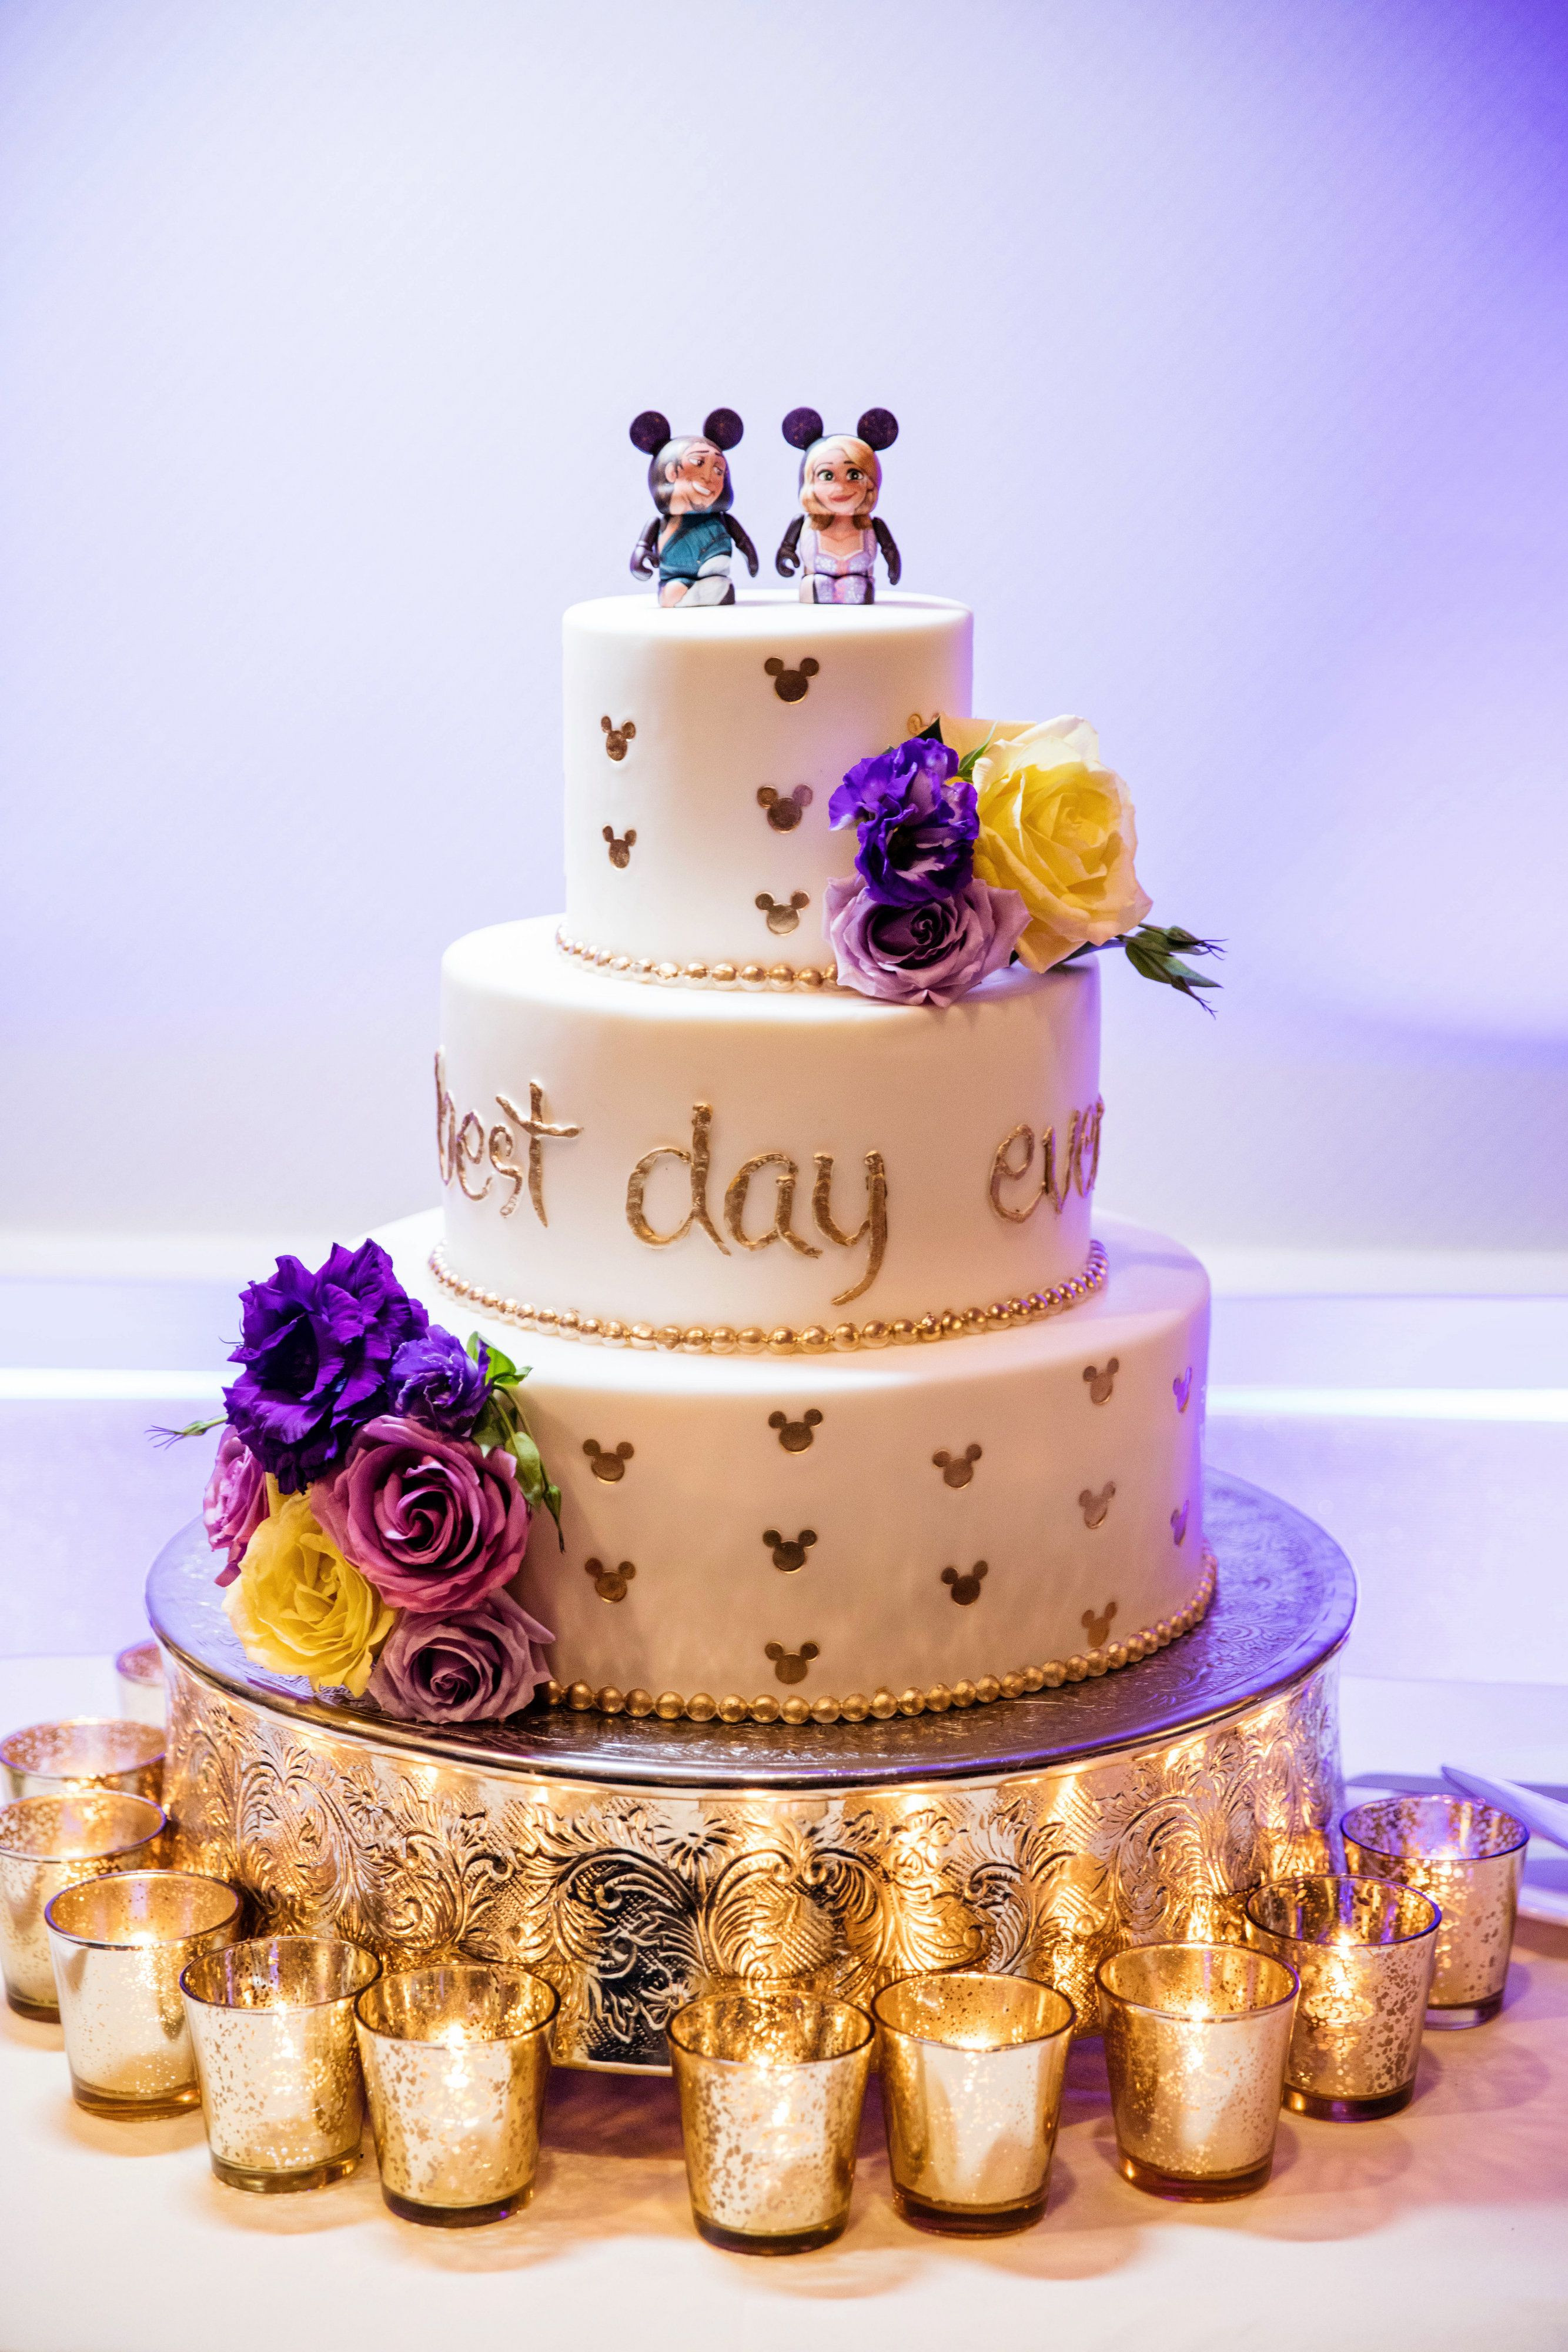 Tangled Wedding Cakes
 A Tangled inspired wedding cake for your Best Day Ever